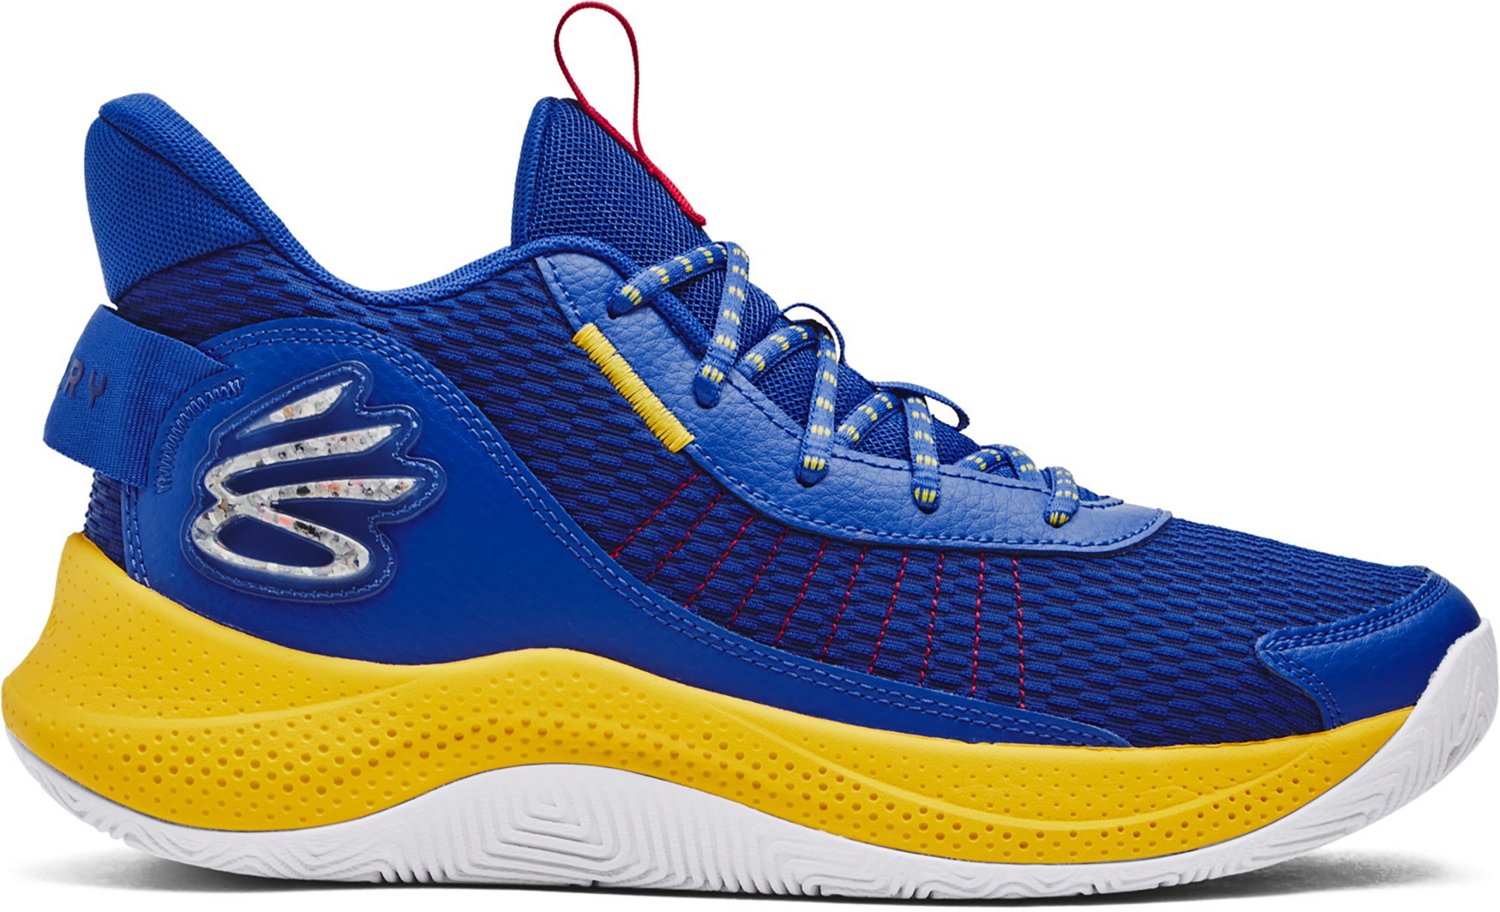 Under Armour Unisex Curry 3Z7 Basketball Shoes